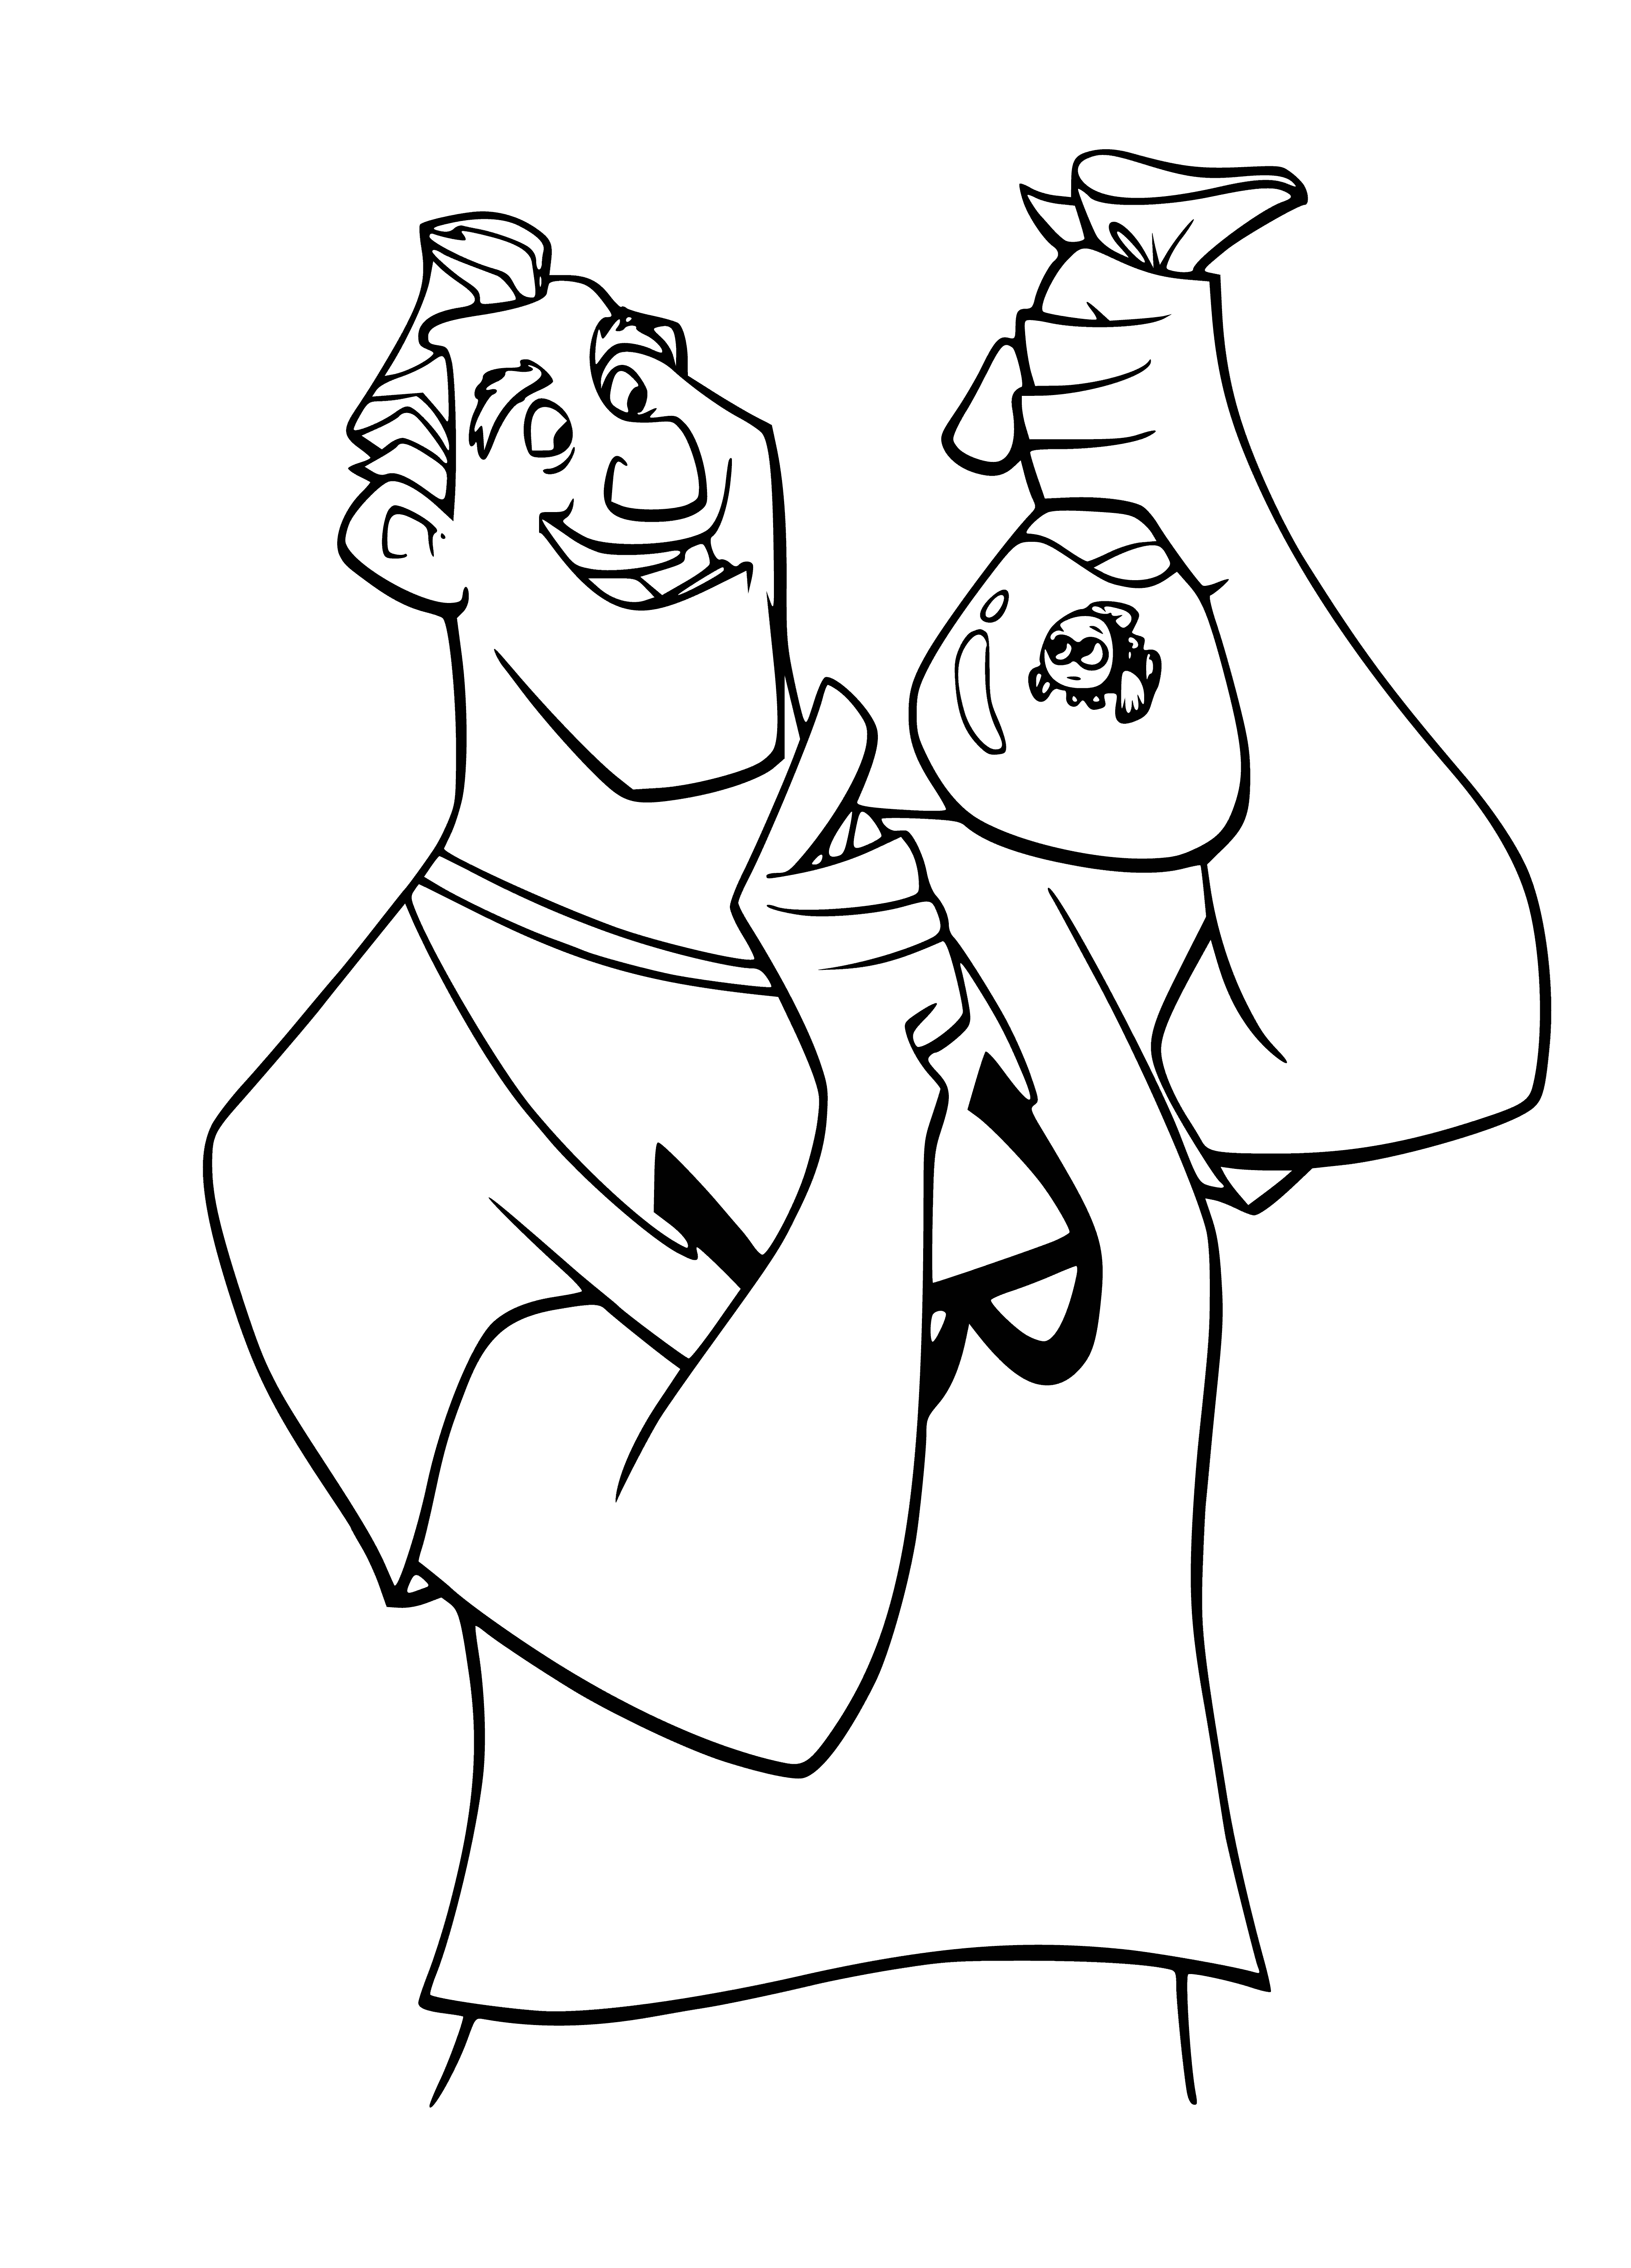 coloring page: Dentist holds a scared fish trying to escape in a coloring page.